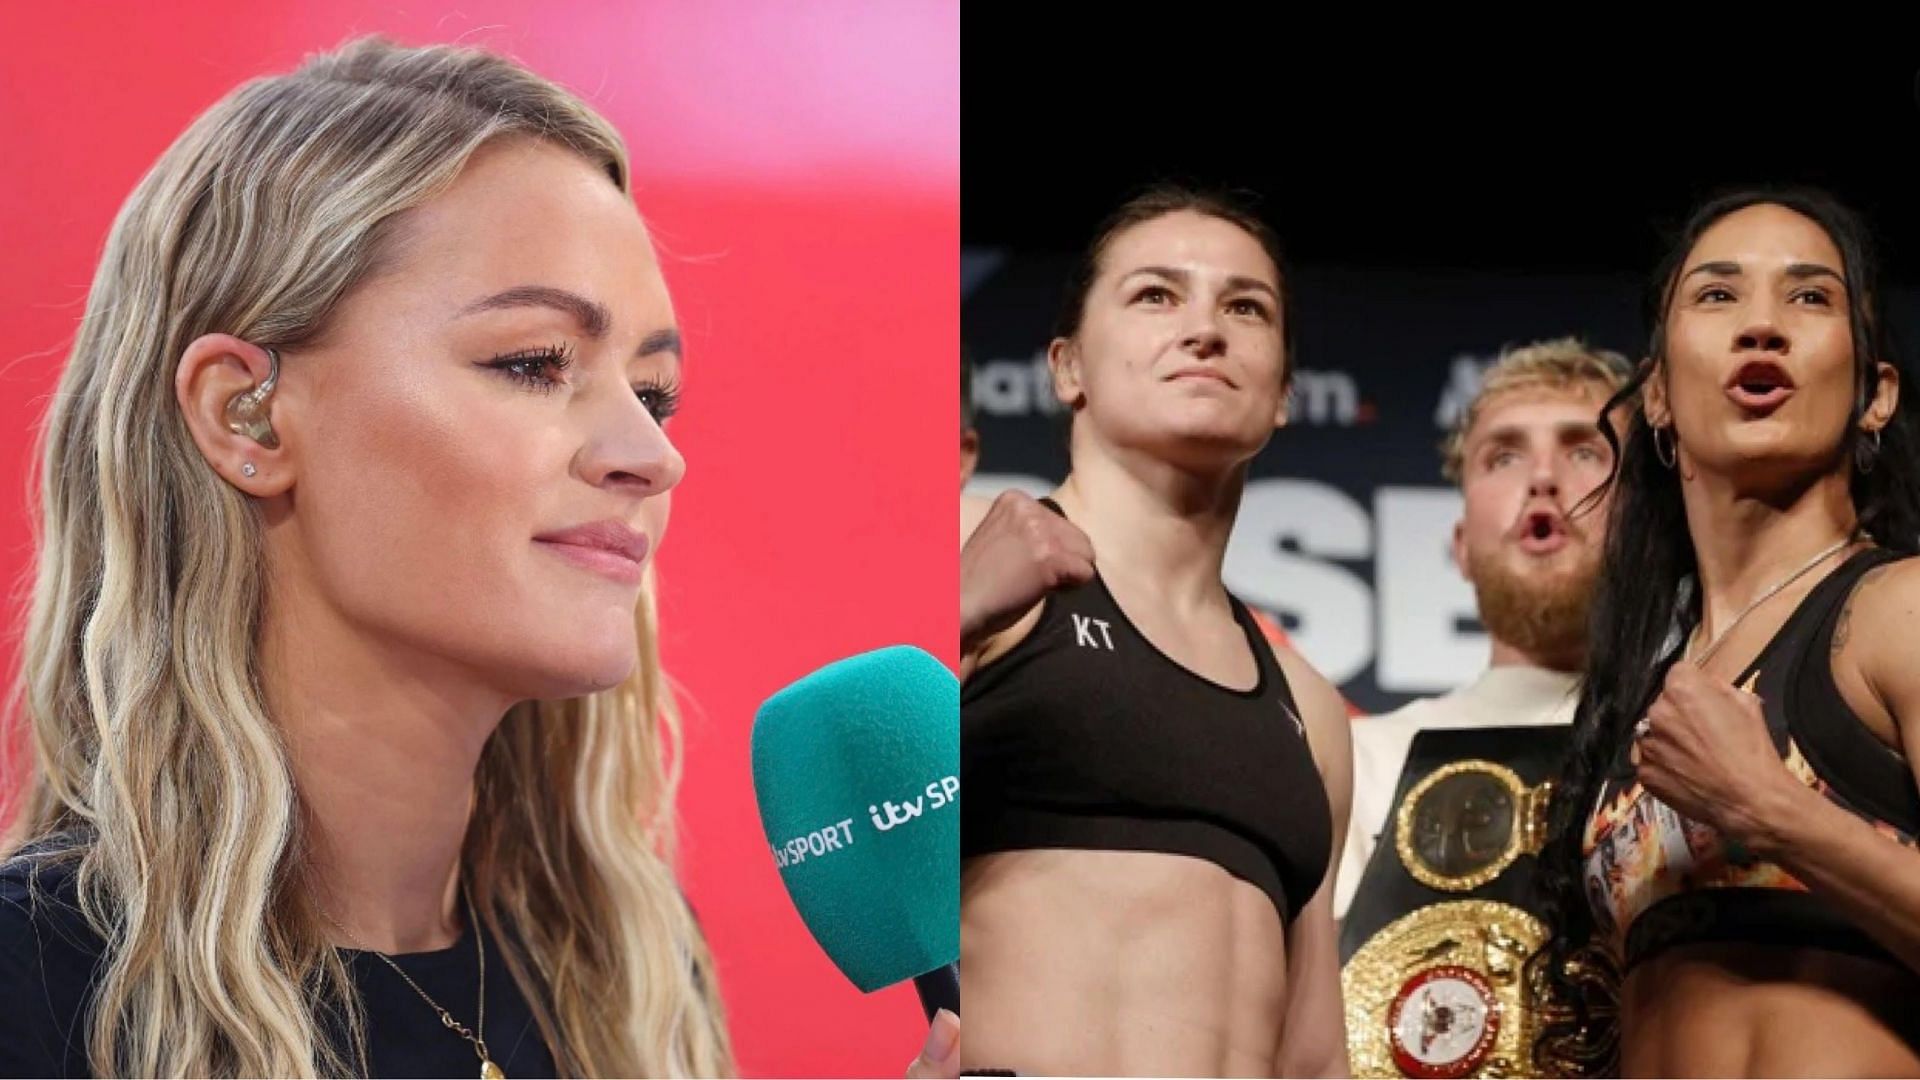 Laura Woods (left), Katie Taylor and Amanda Serrano (right) [Images courtesy of Getty]